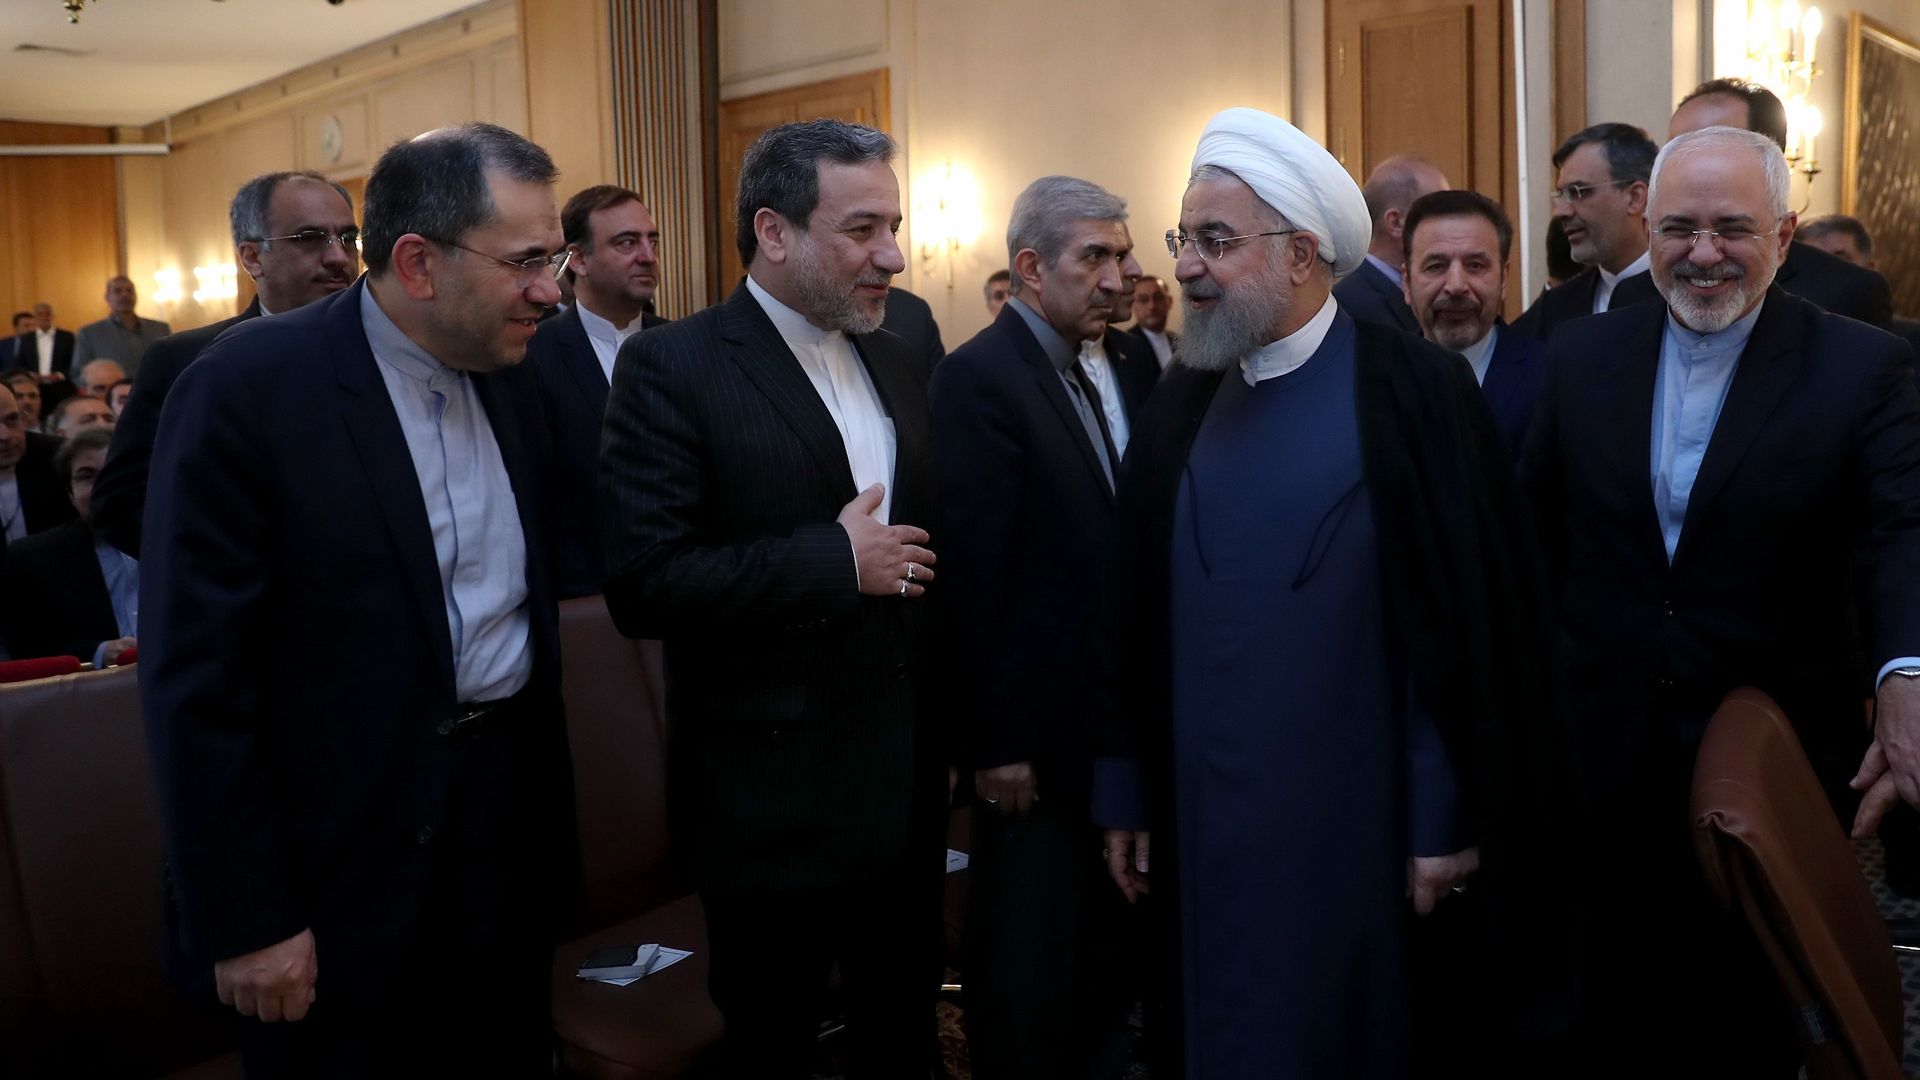  Iranian President Hassan Rouhani and Iranian Foreign Minister Javad Zarif meeting with foreign embassies and diplomatic mission representatives in Tehran.